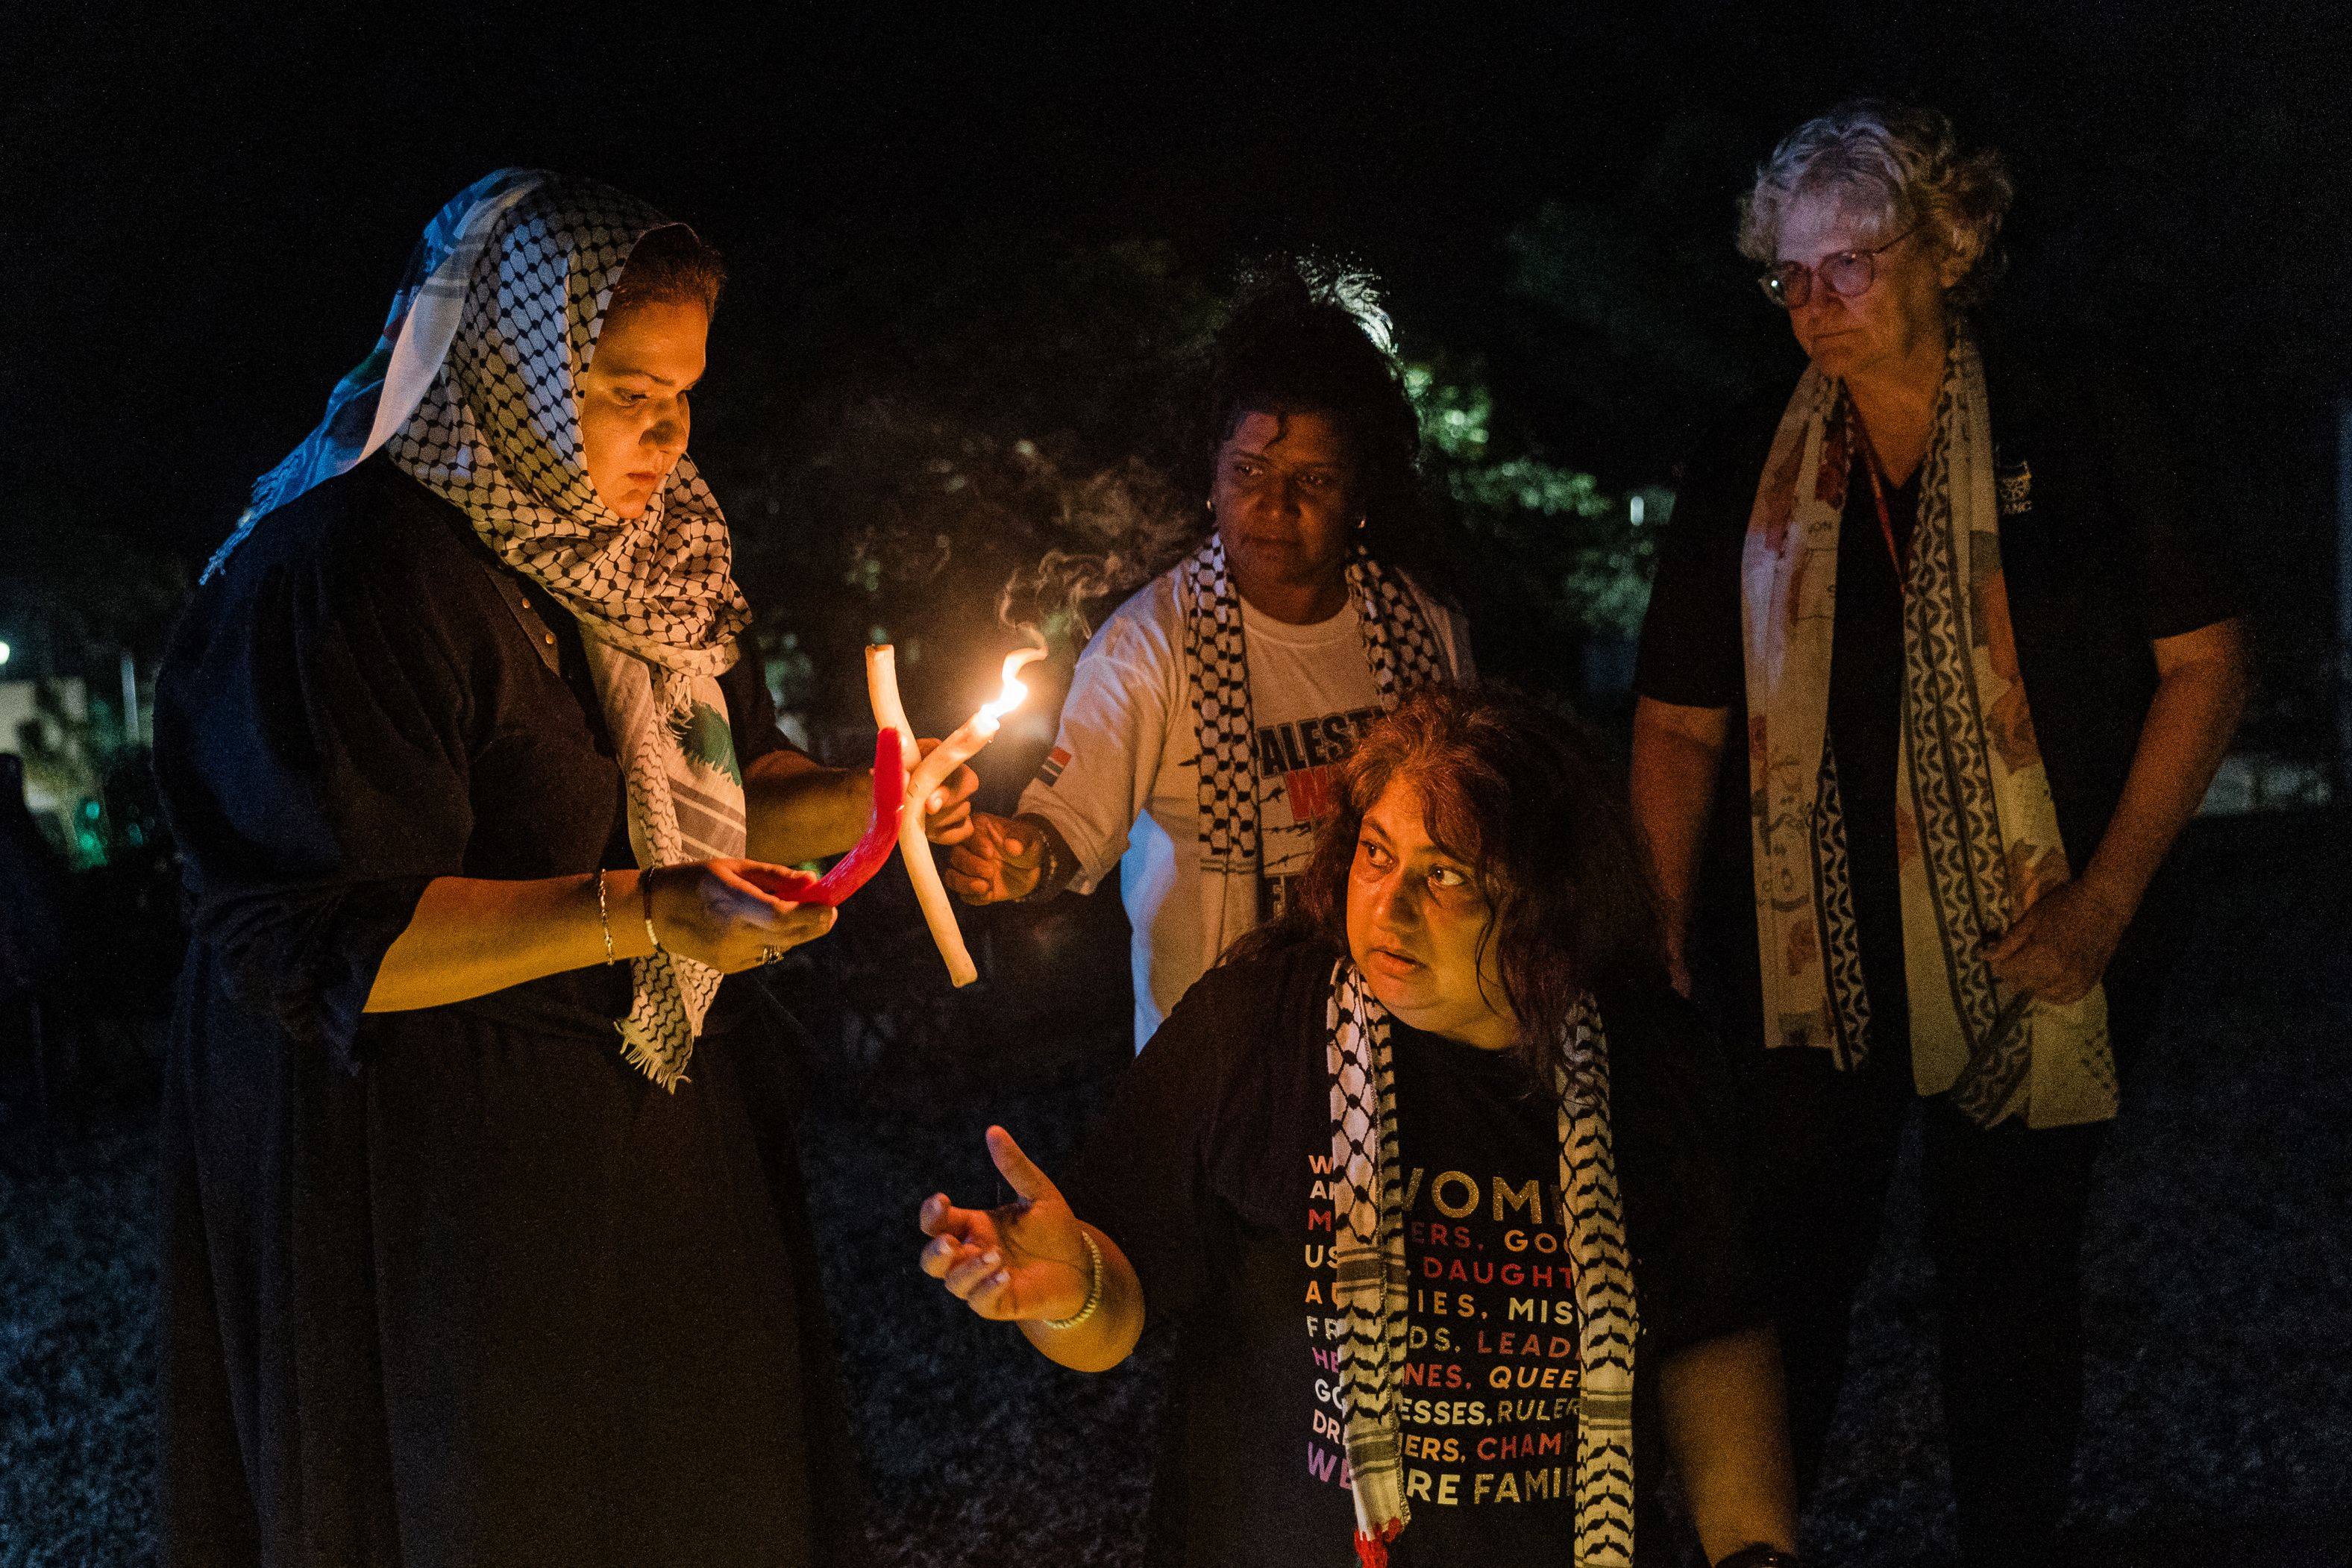 Supporters of Palestinians light candles during a 12-hour night vigil at St Michael’s Anglican church calling for an immediate ceasefire in Gaza and condemning Israel for its continued defiance of the International Court of Justice’s provisional measures in Durban, South Africa, on March 8. Photo: AFP